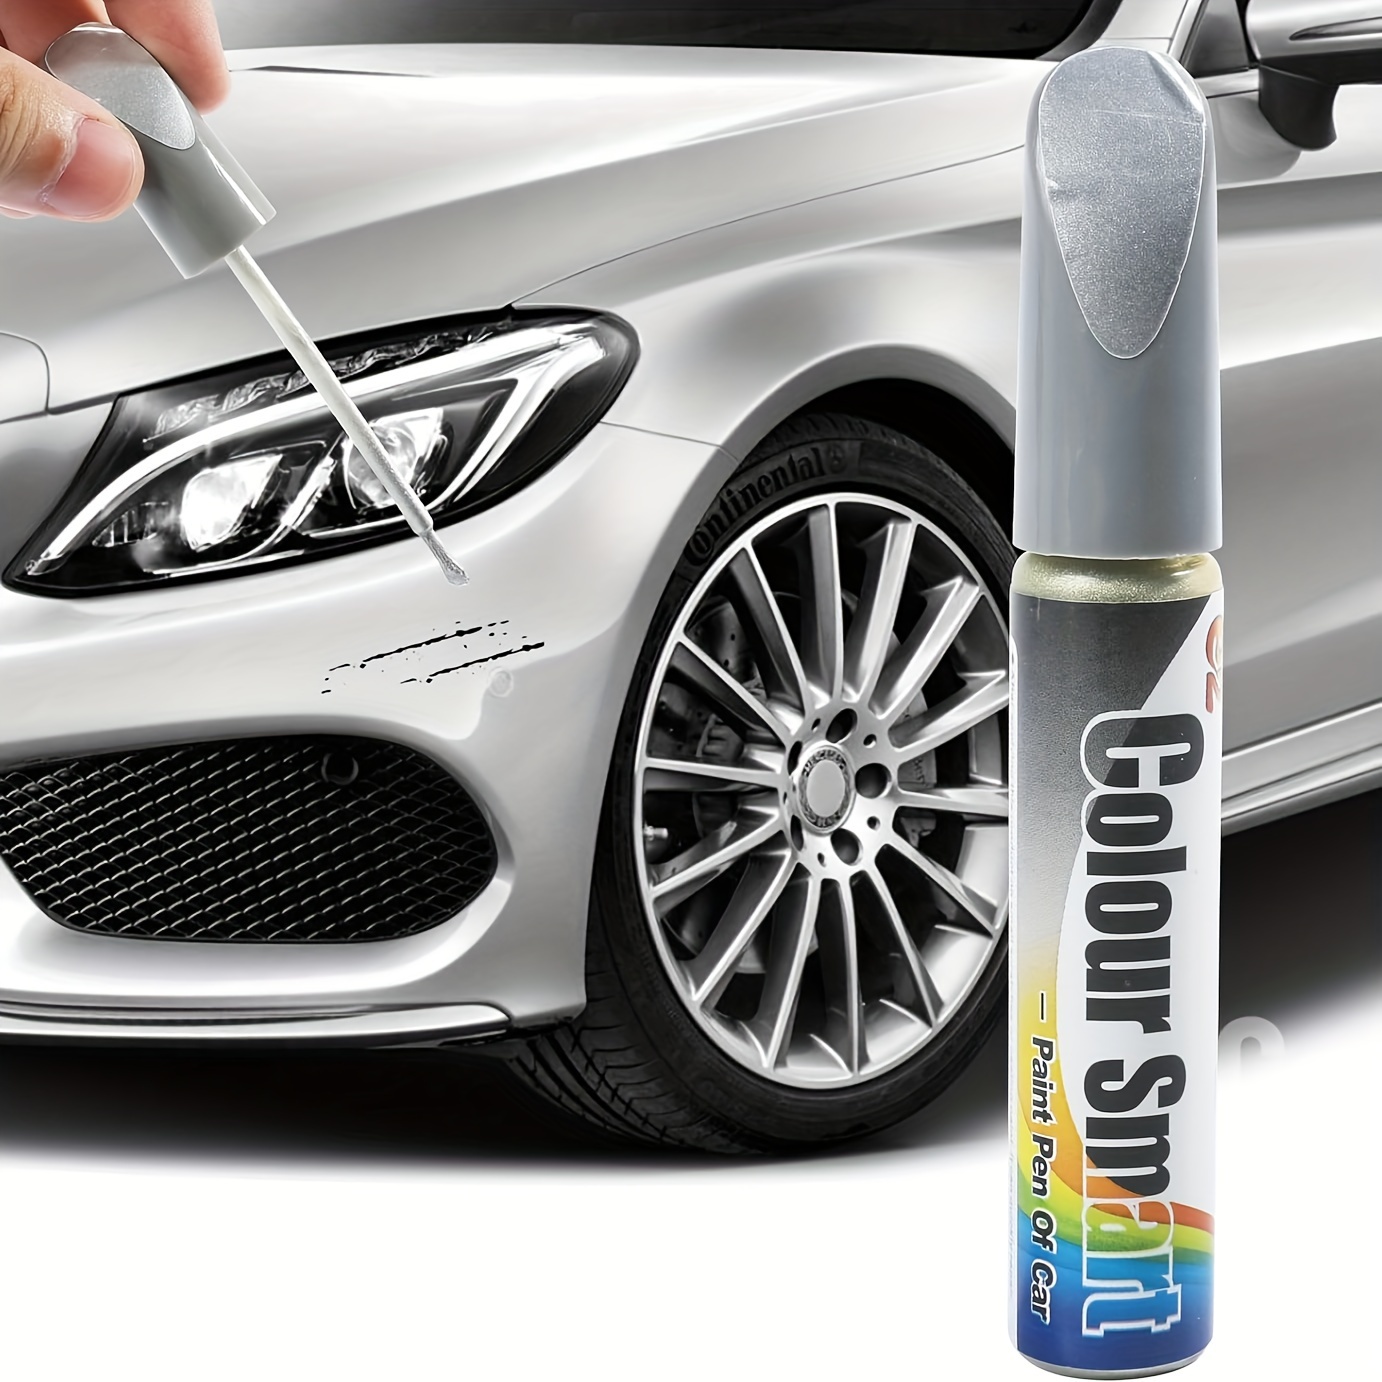 Silver Touch Up Paint Pen for Cars, Car Paint Scratch Repair, Two-In-One  Car Touch Up Paint Fill Paint Pen, Quick & Easy Solution to Repair Minor